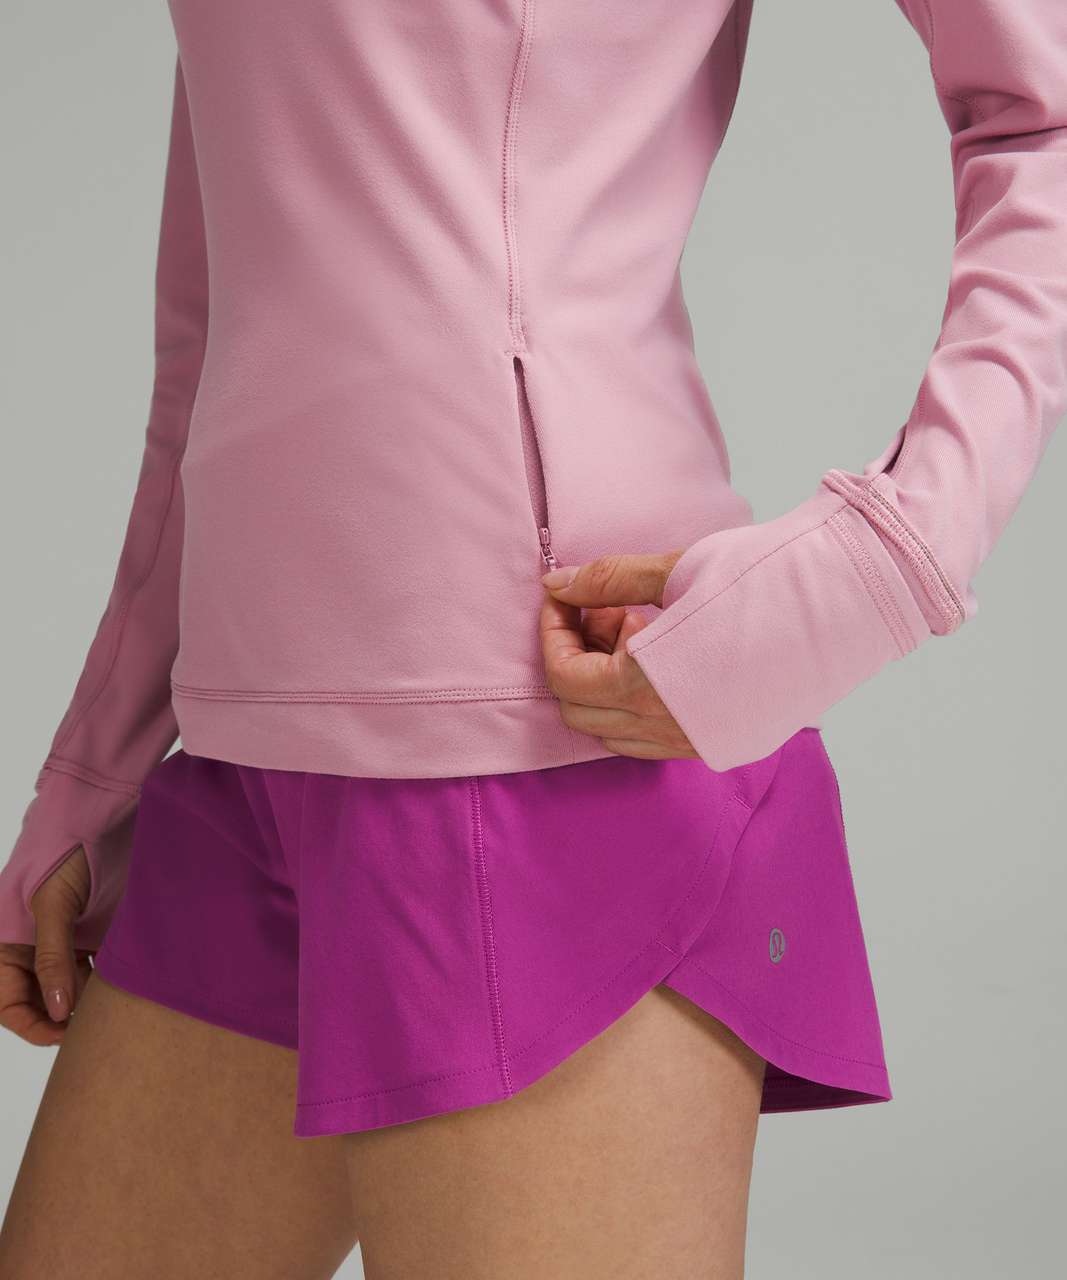 lululemon athletica, Tops, Its Rulu Run Cropped 2 Zip Pink Taupe